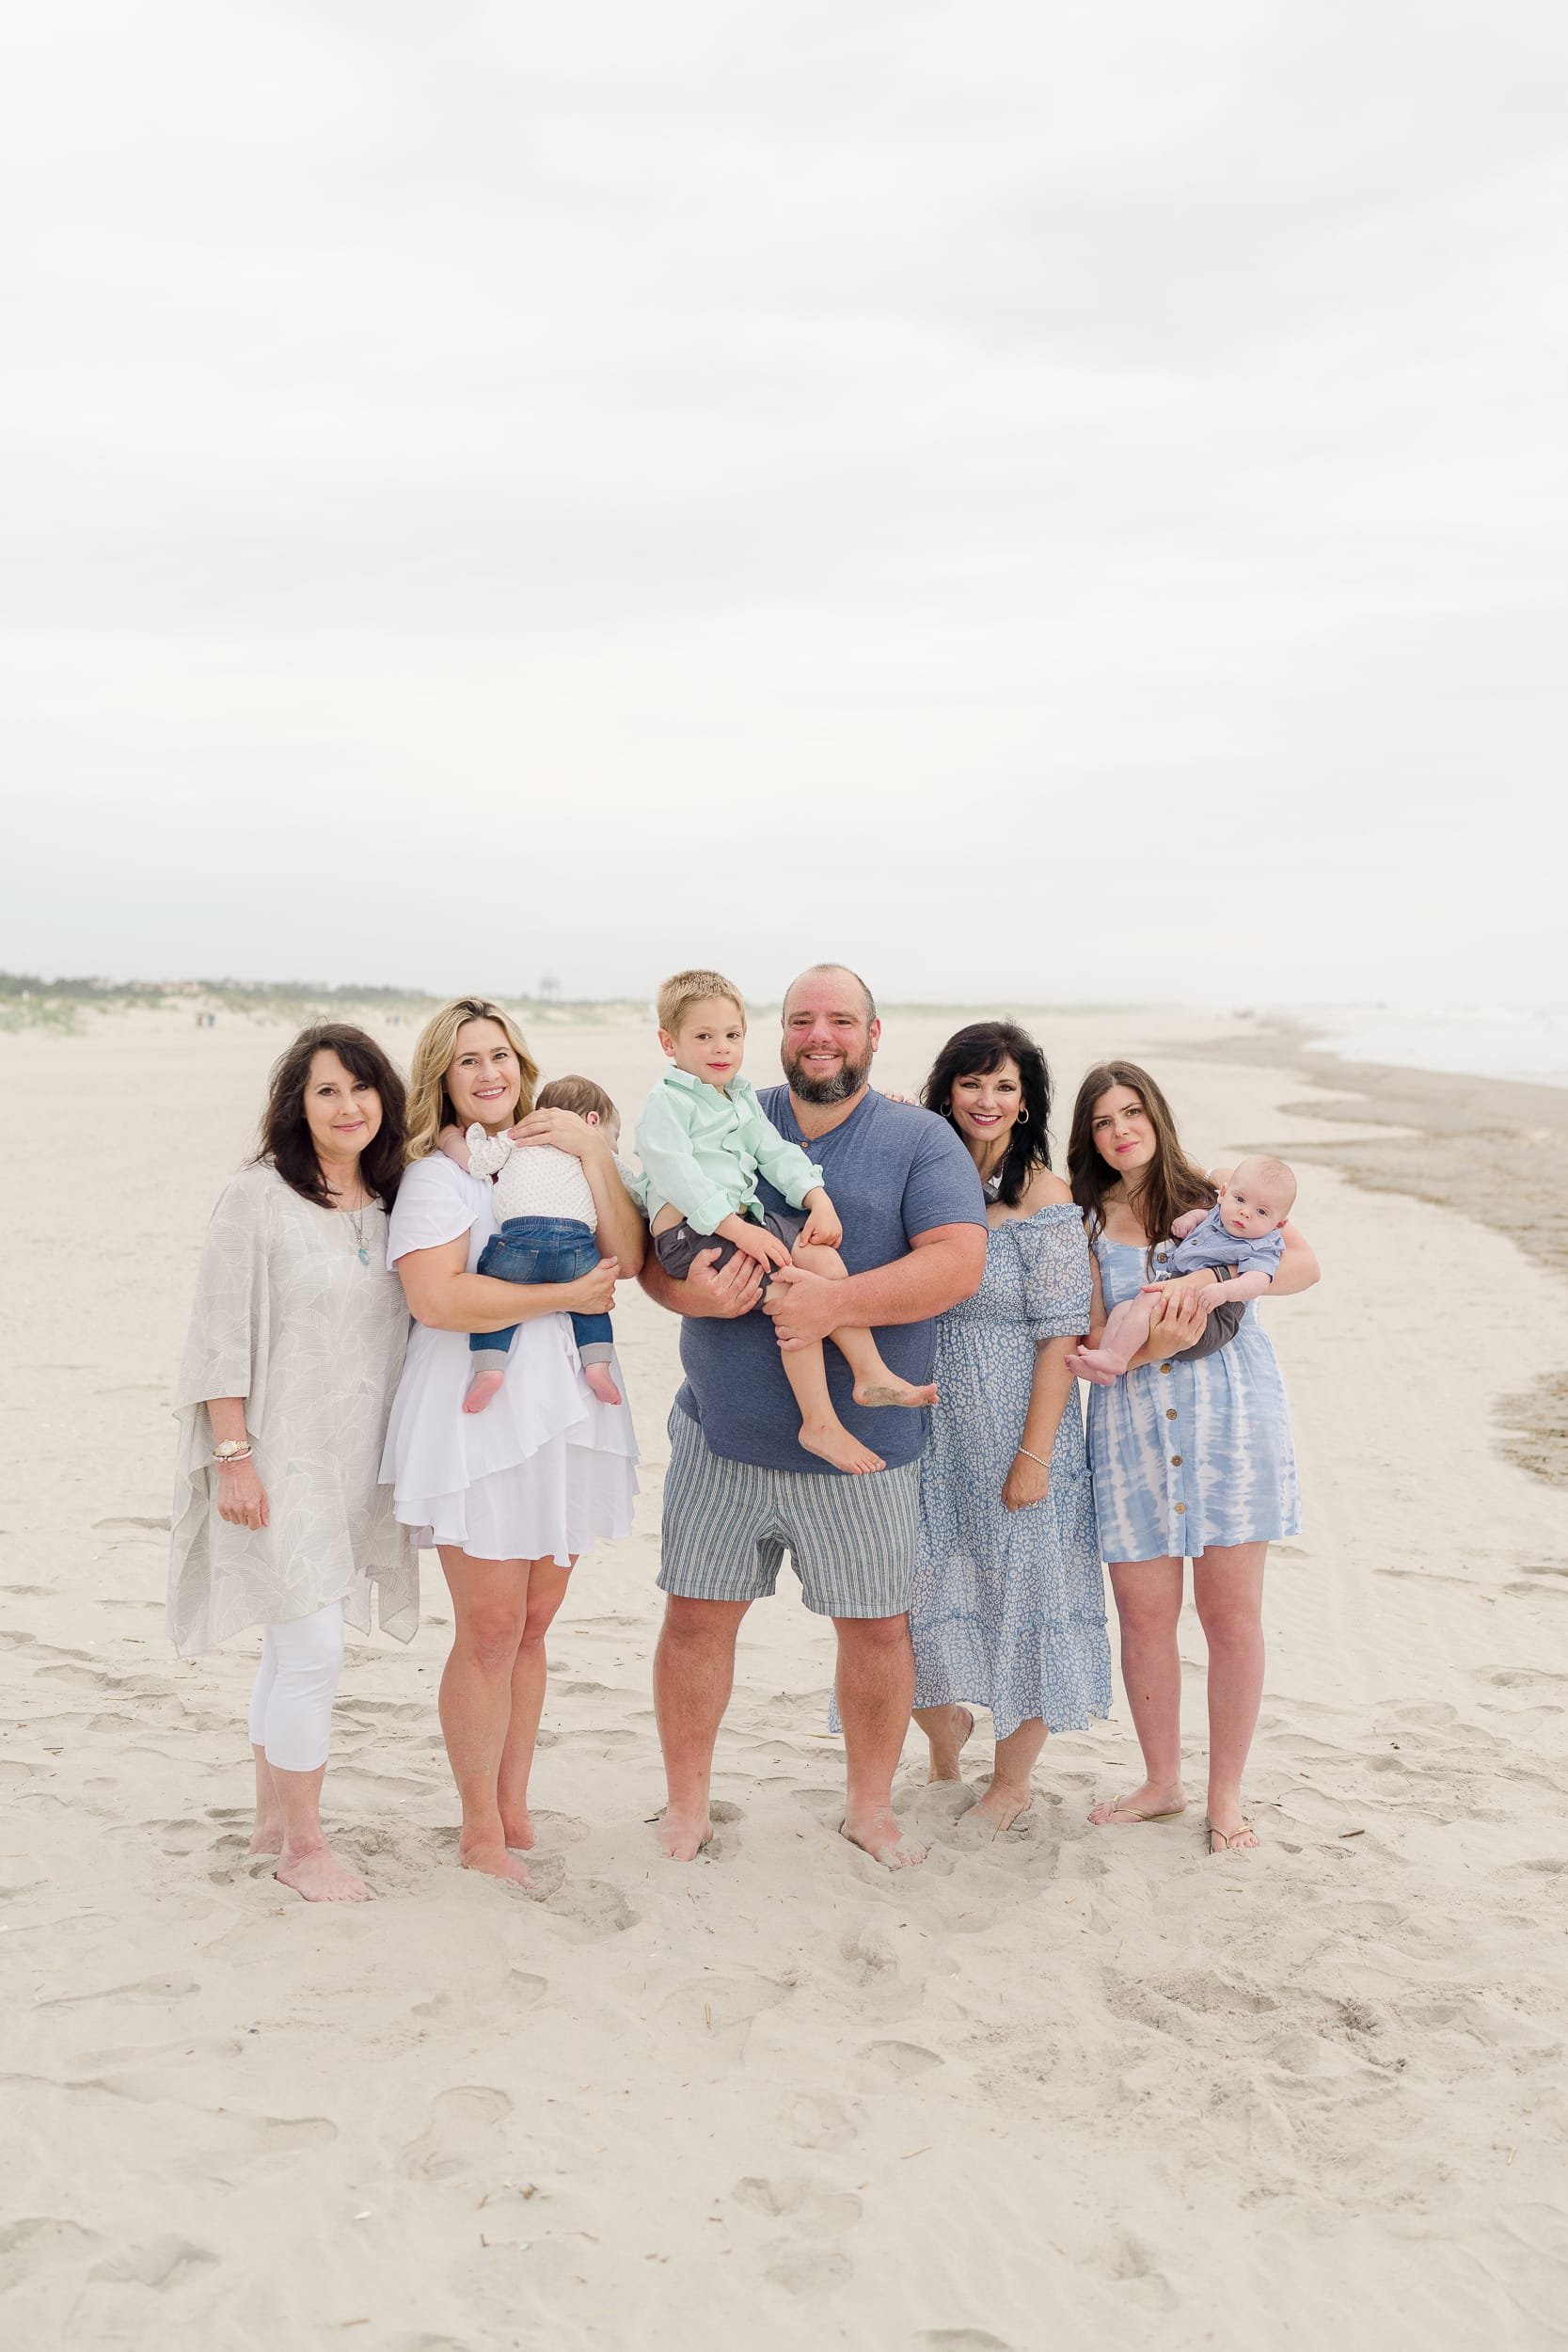 Family wearing blue and white poses on the beach for an extended family photoshoot in Avalon, NJ.